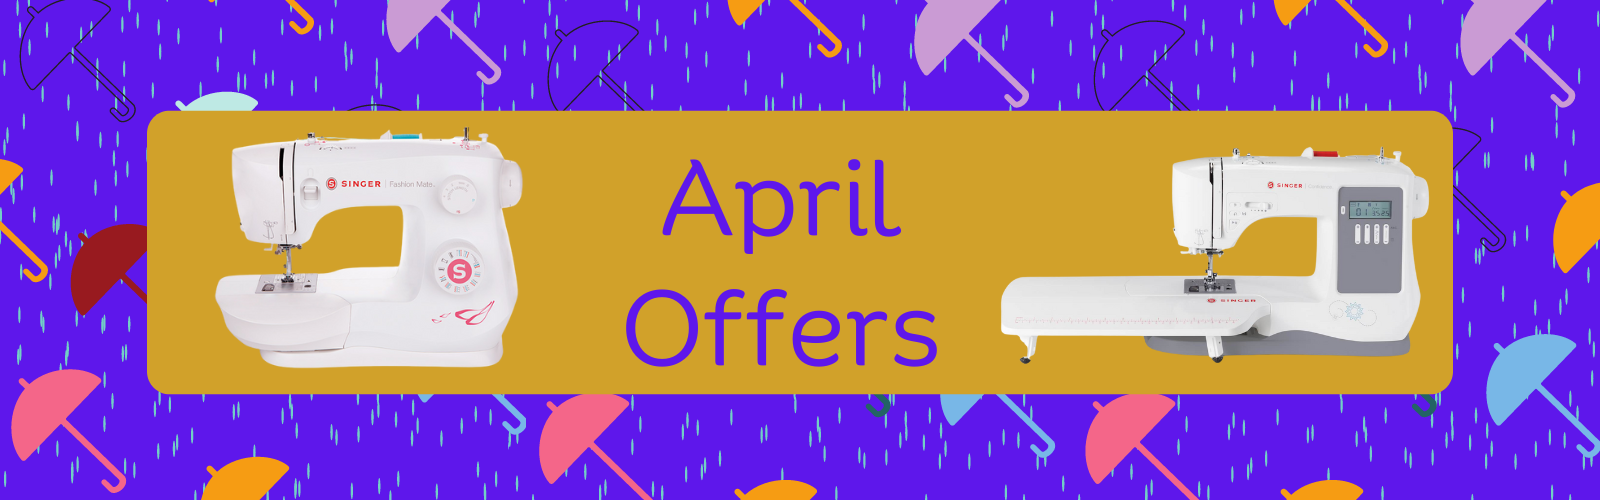 April Offers on Singer Sewing Machines at Sewing Direct